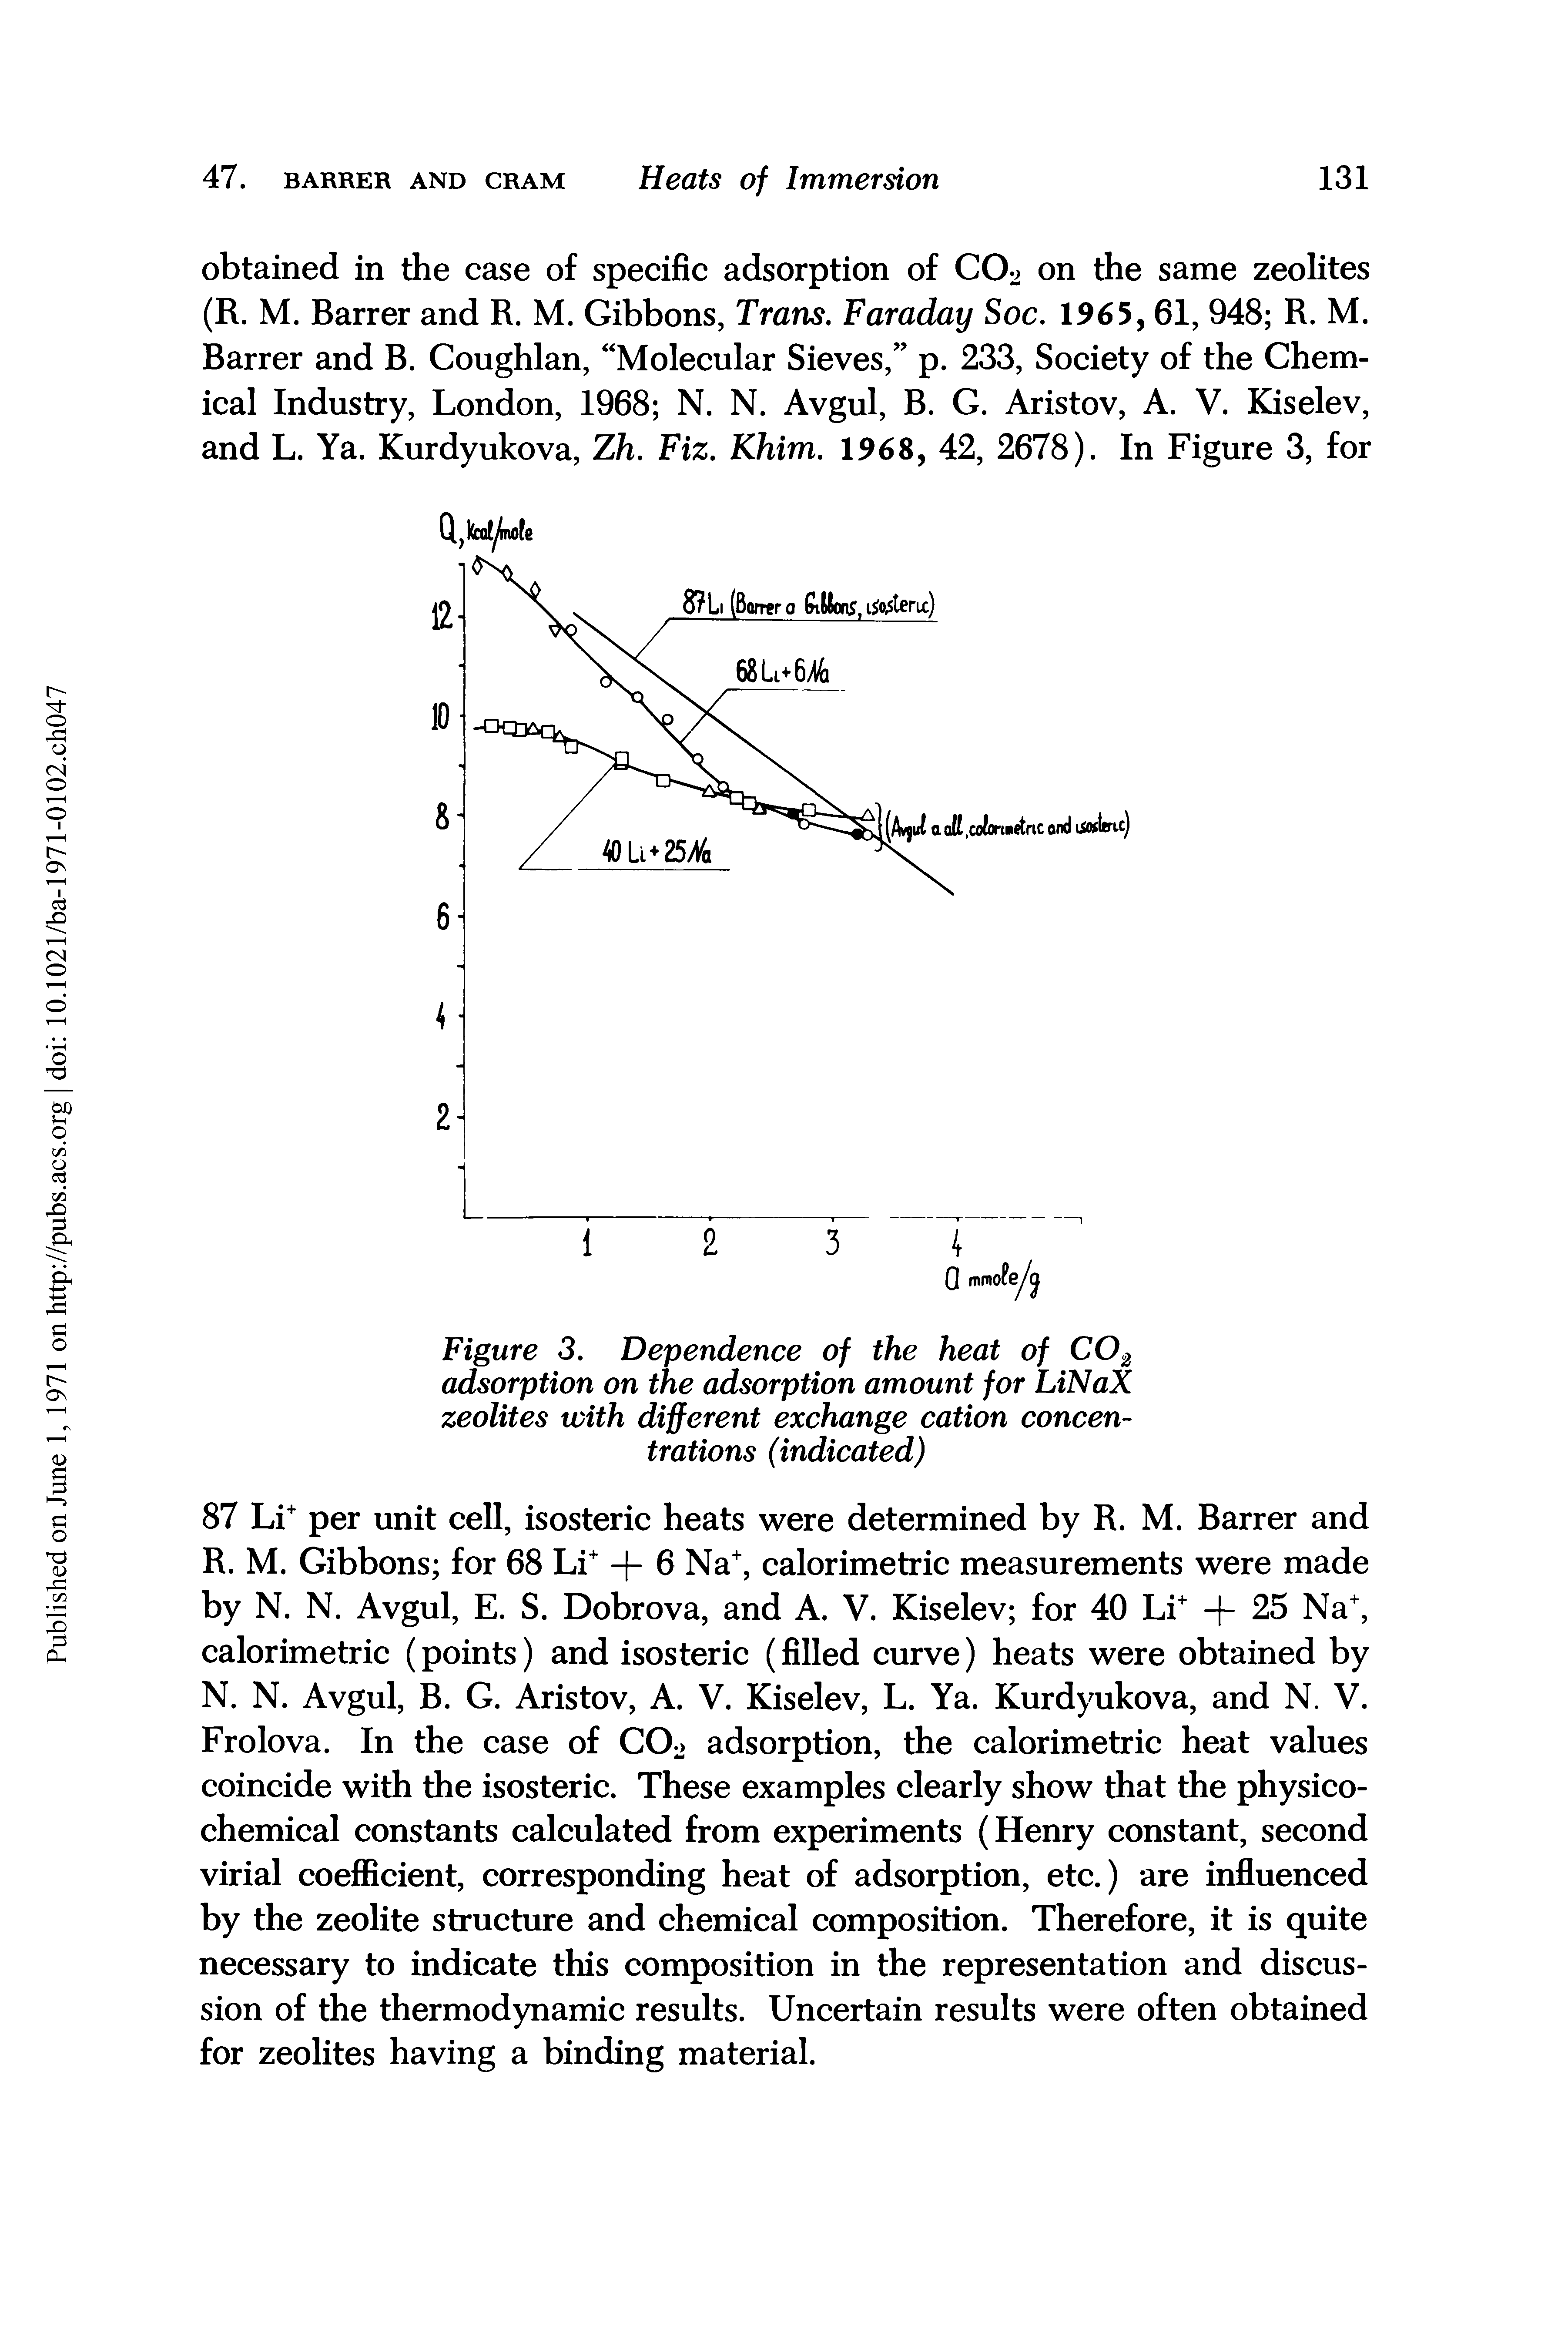 Figure 3. Dependence of the heat of CO adsorption on the adsorption amount for LiNaX zeolites with different exchange cation concentrations (indicated)...